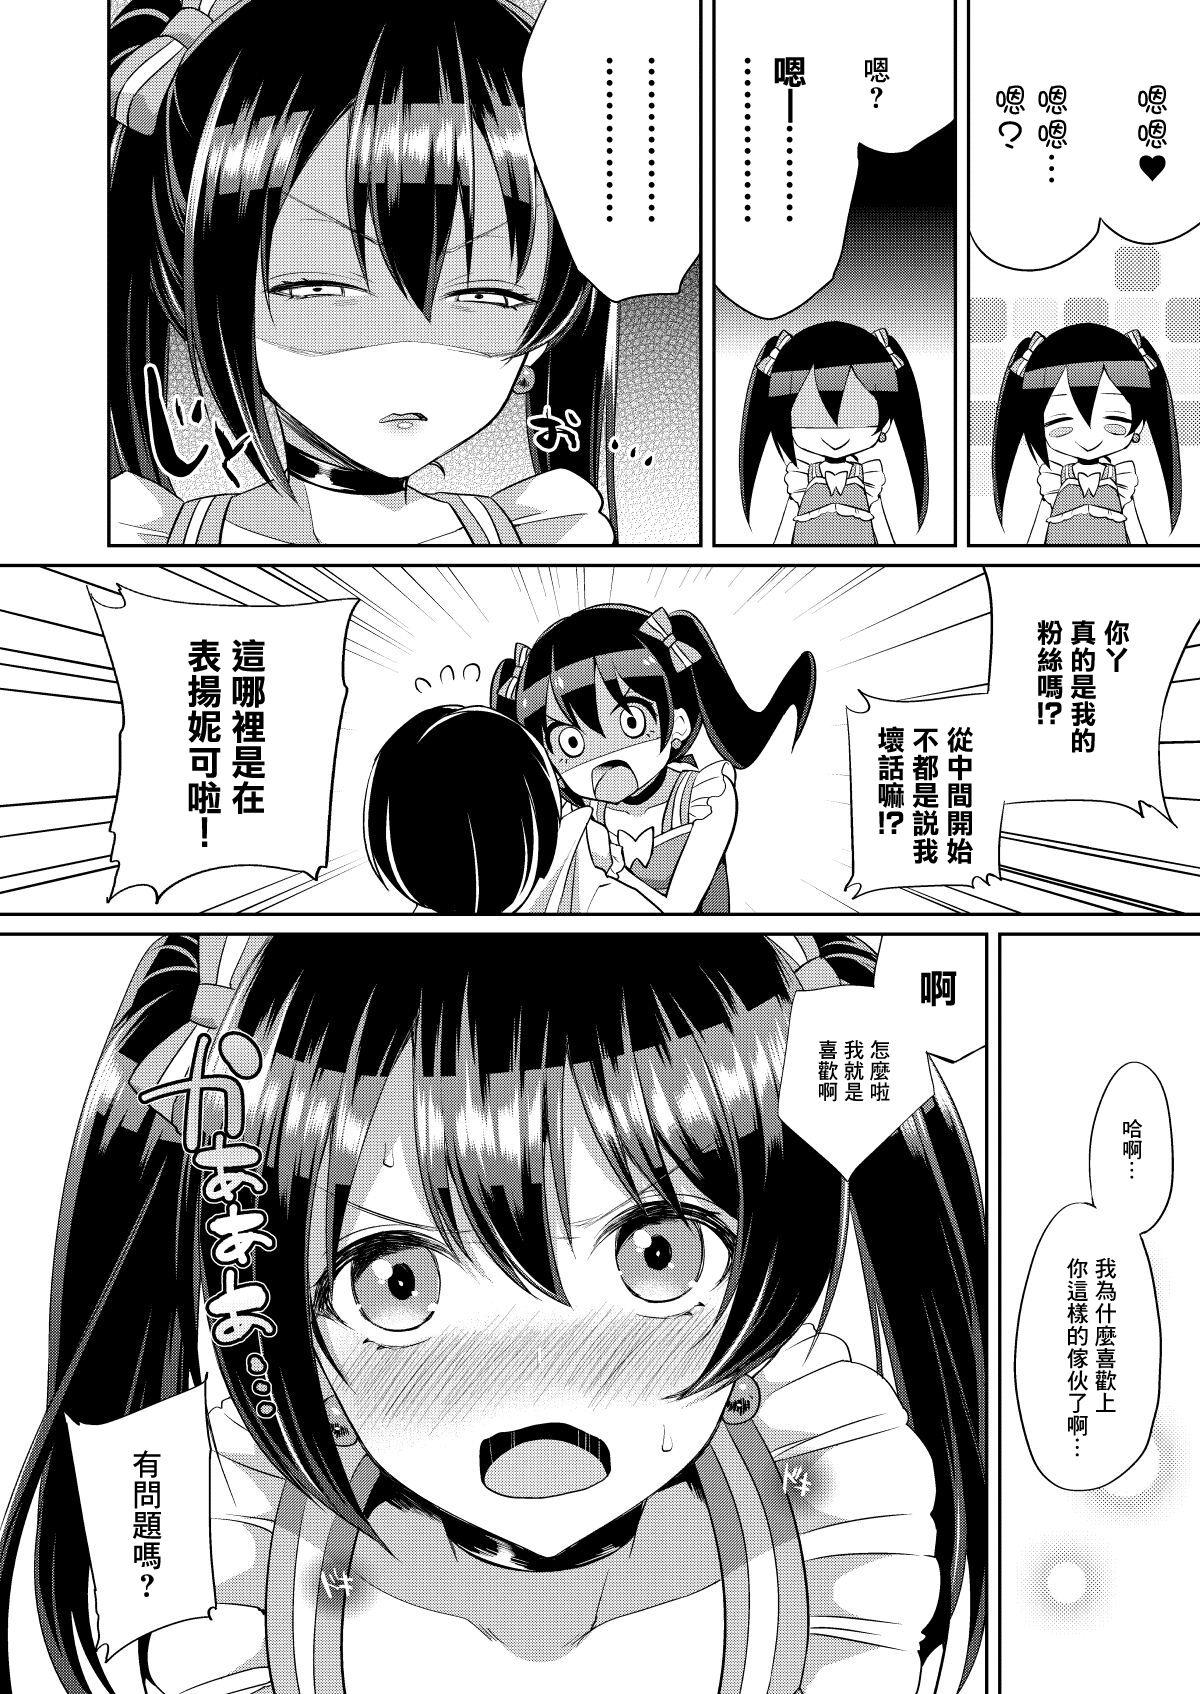 Rough Sex にこといちゃラブエッチ - Love live Facial - Page 2